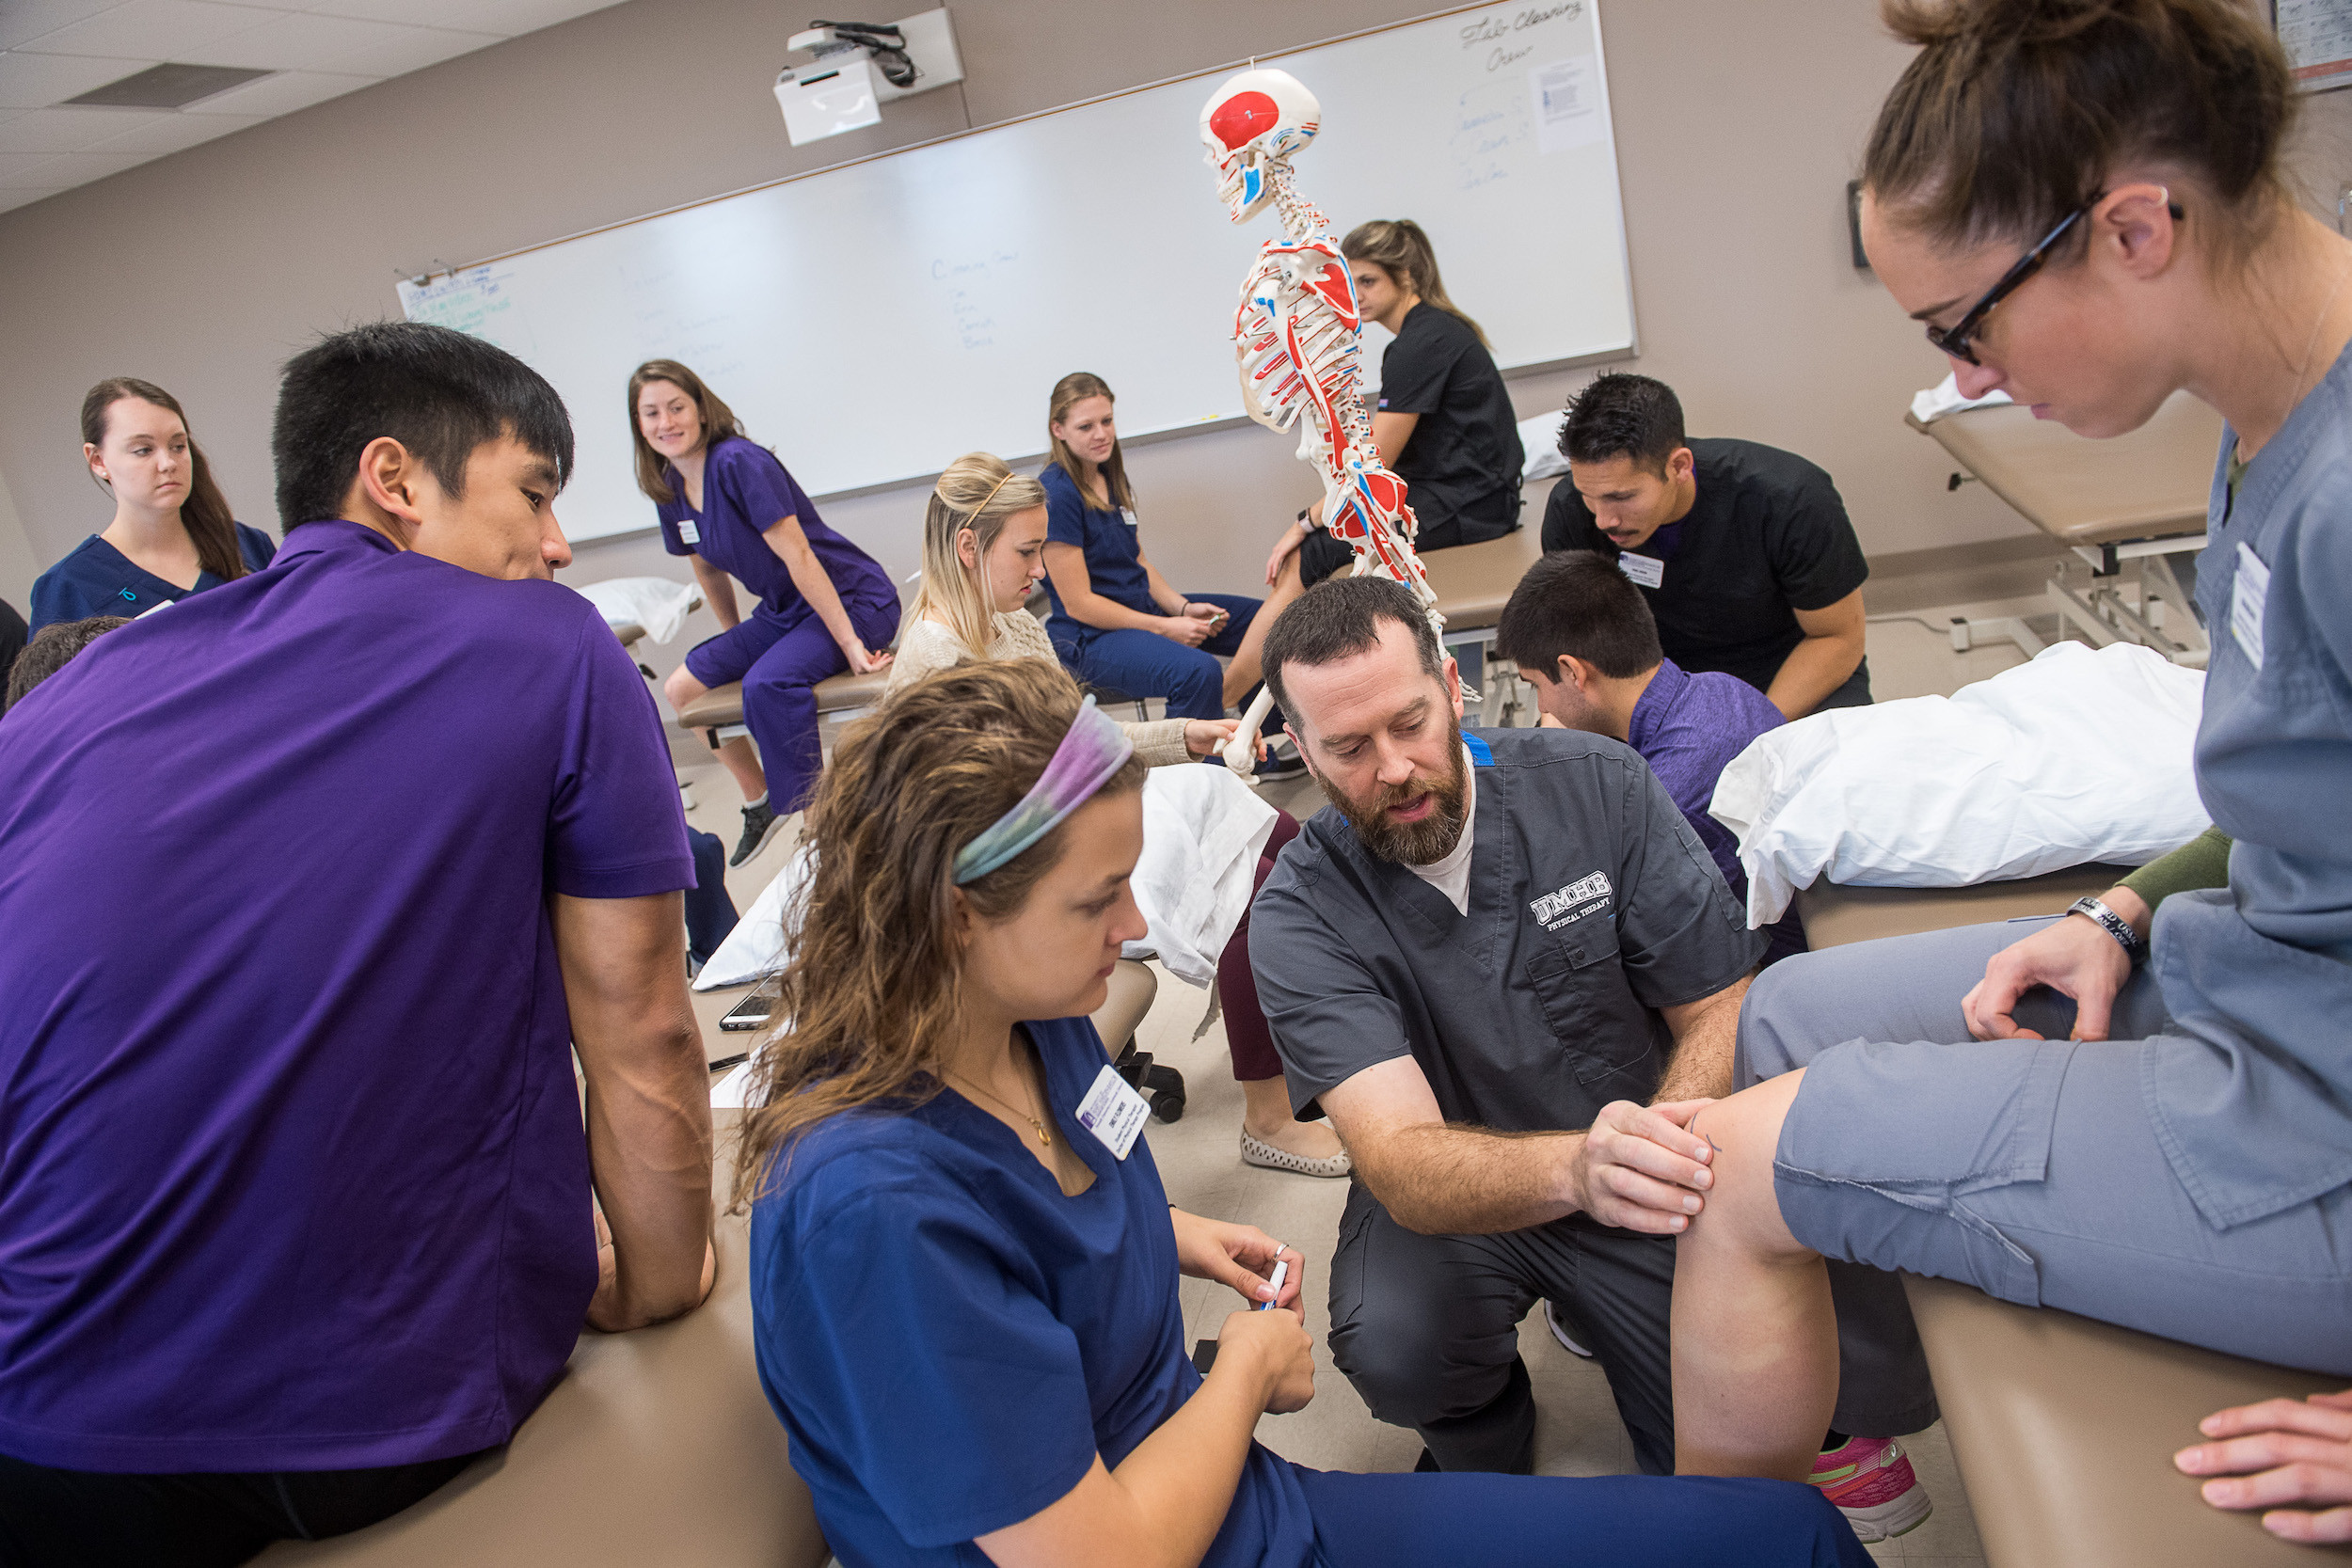 UMHB instructer showing students something with a knee on a patient